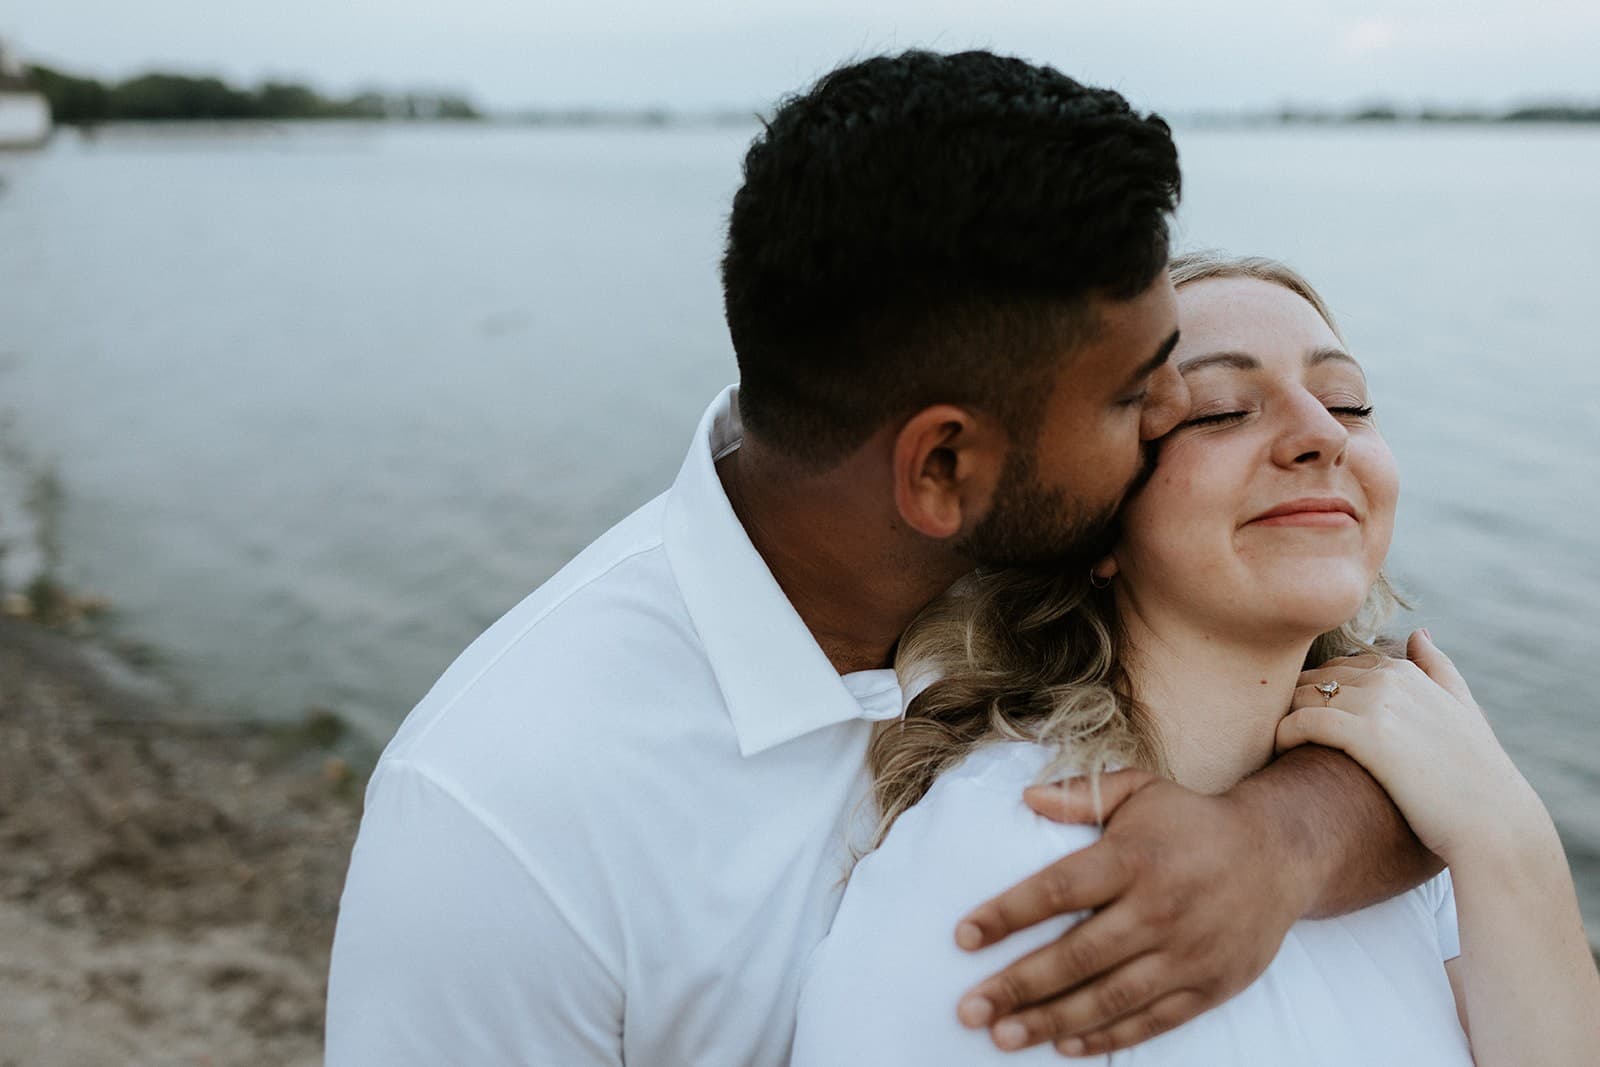 Evening Engagement Session at Toronto's Cherry Beach